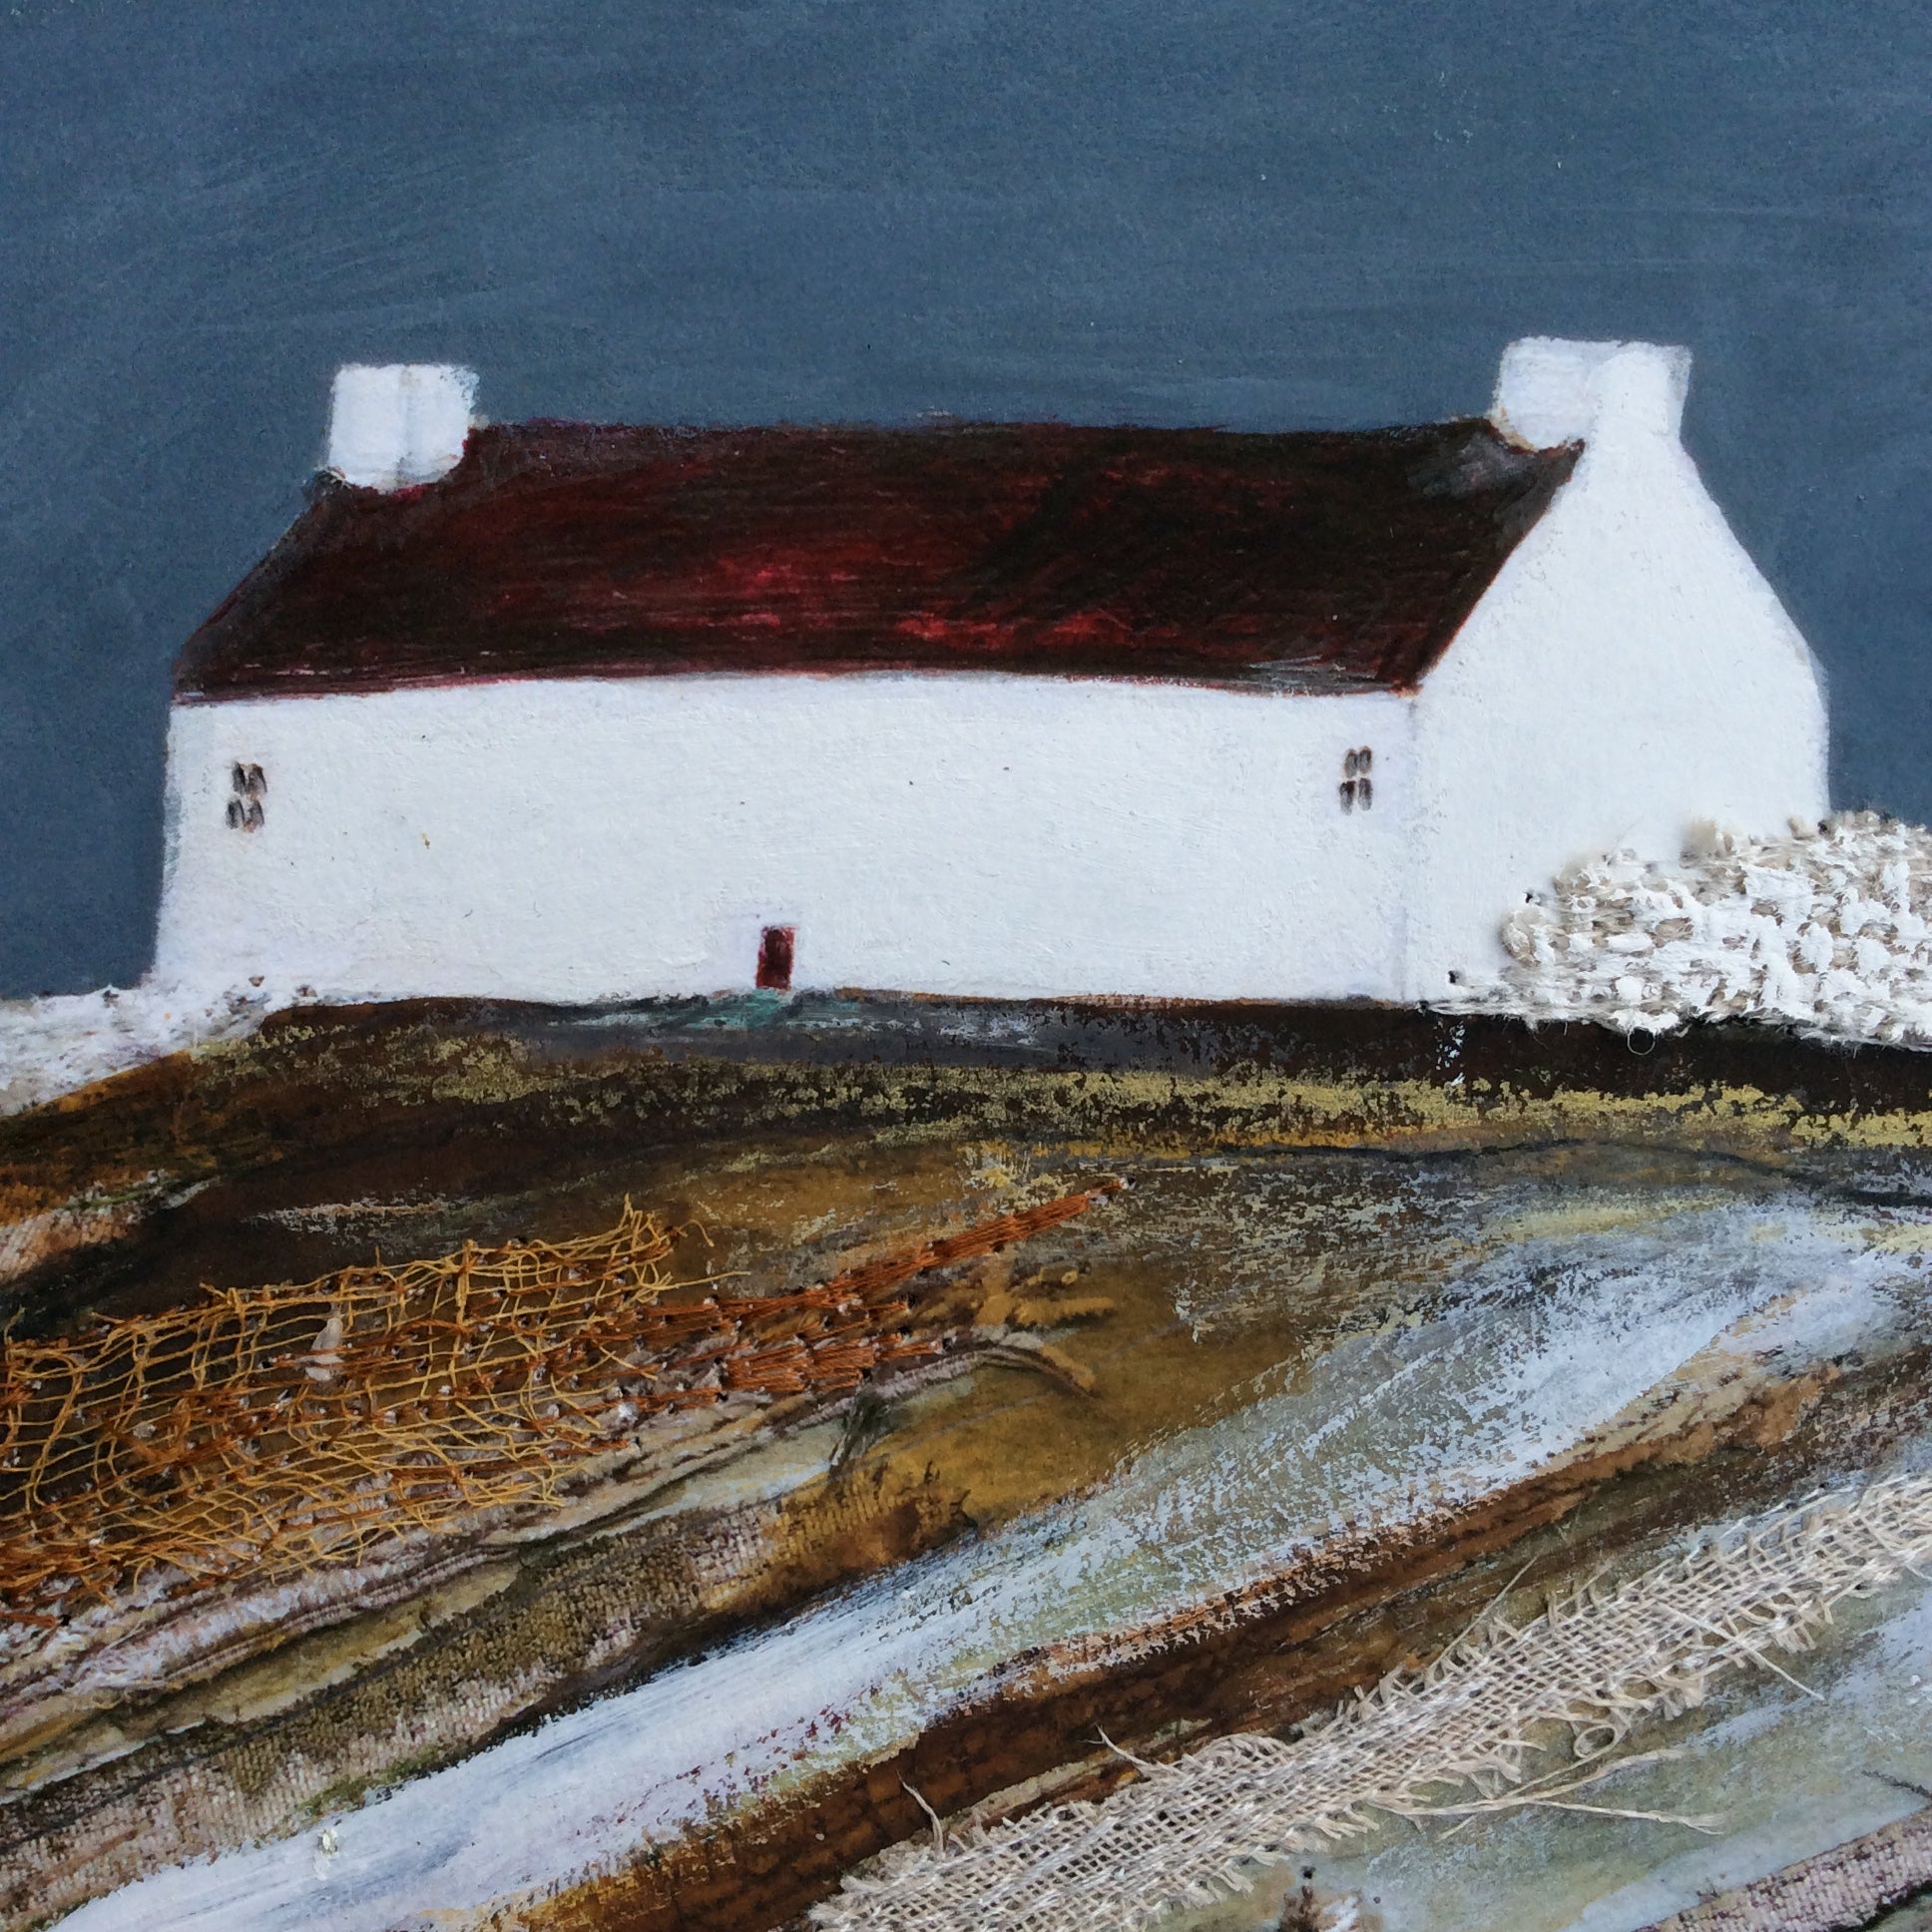 Special edition limited edition print by Louise O'Hara “Autumn Cottage” Special Edition 1